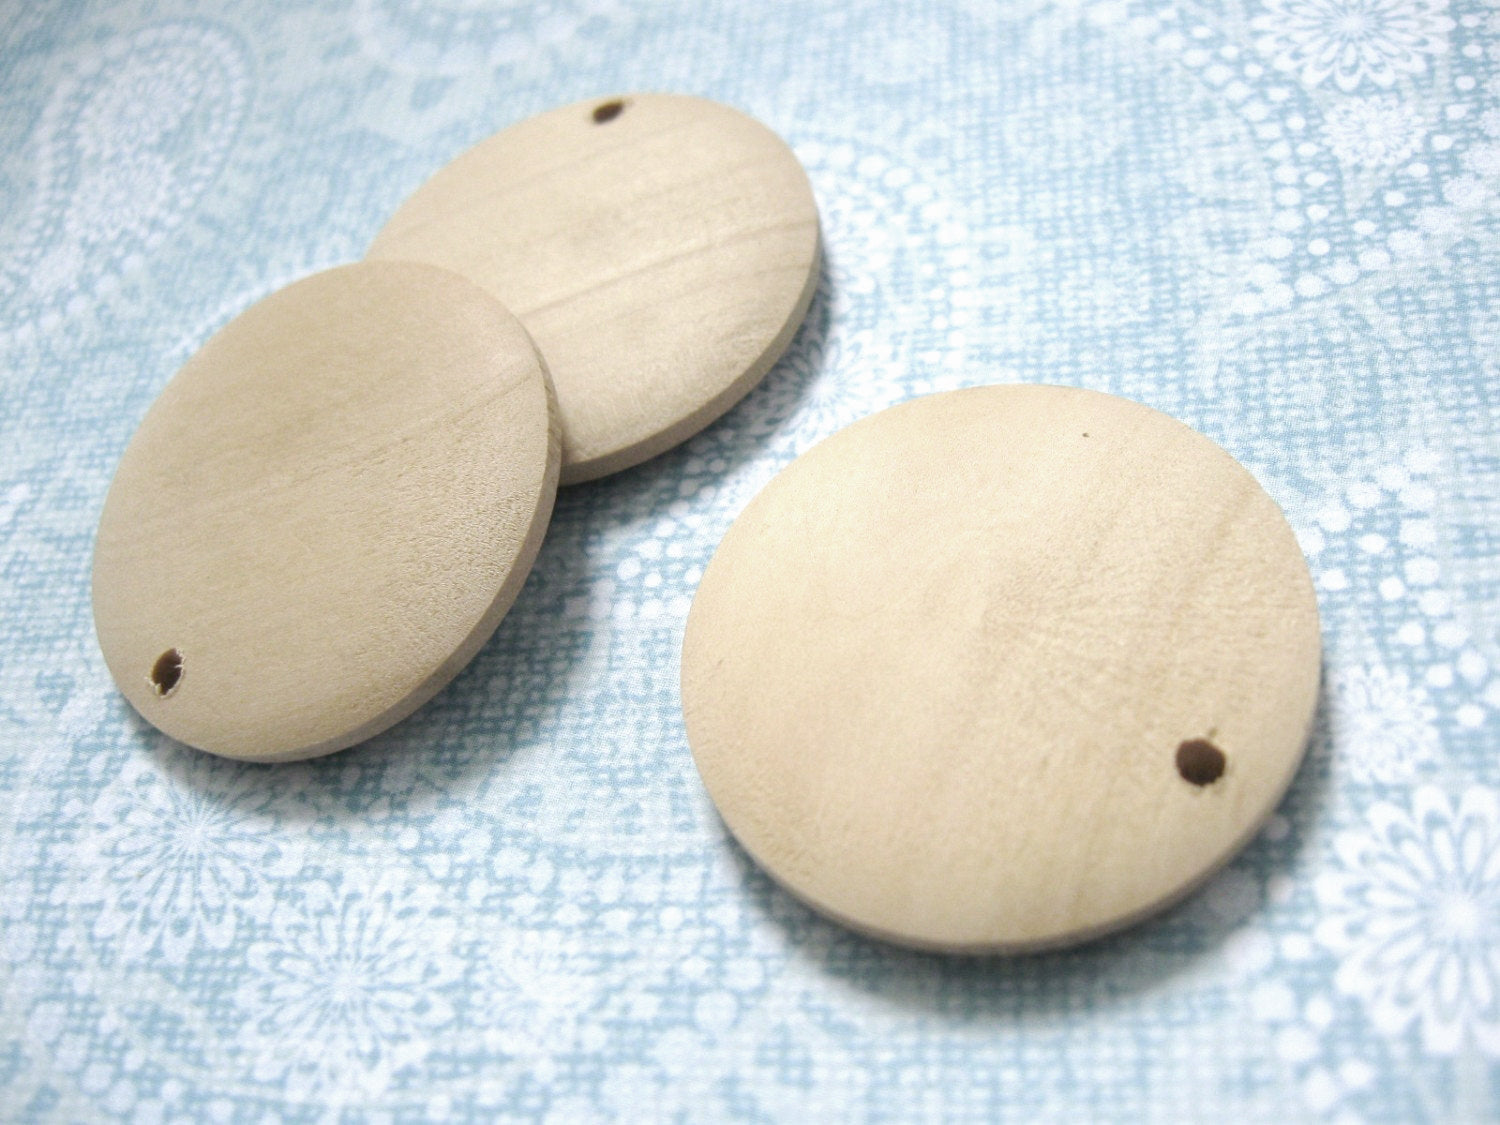 140 Natural marblized coconut wood Beads 4mm